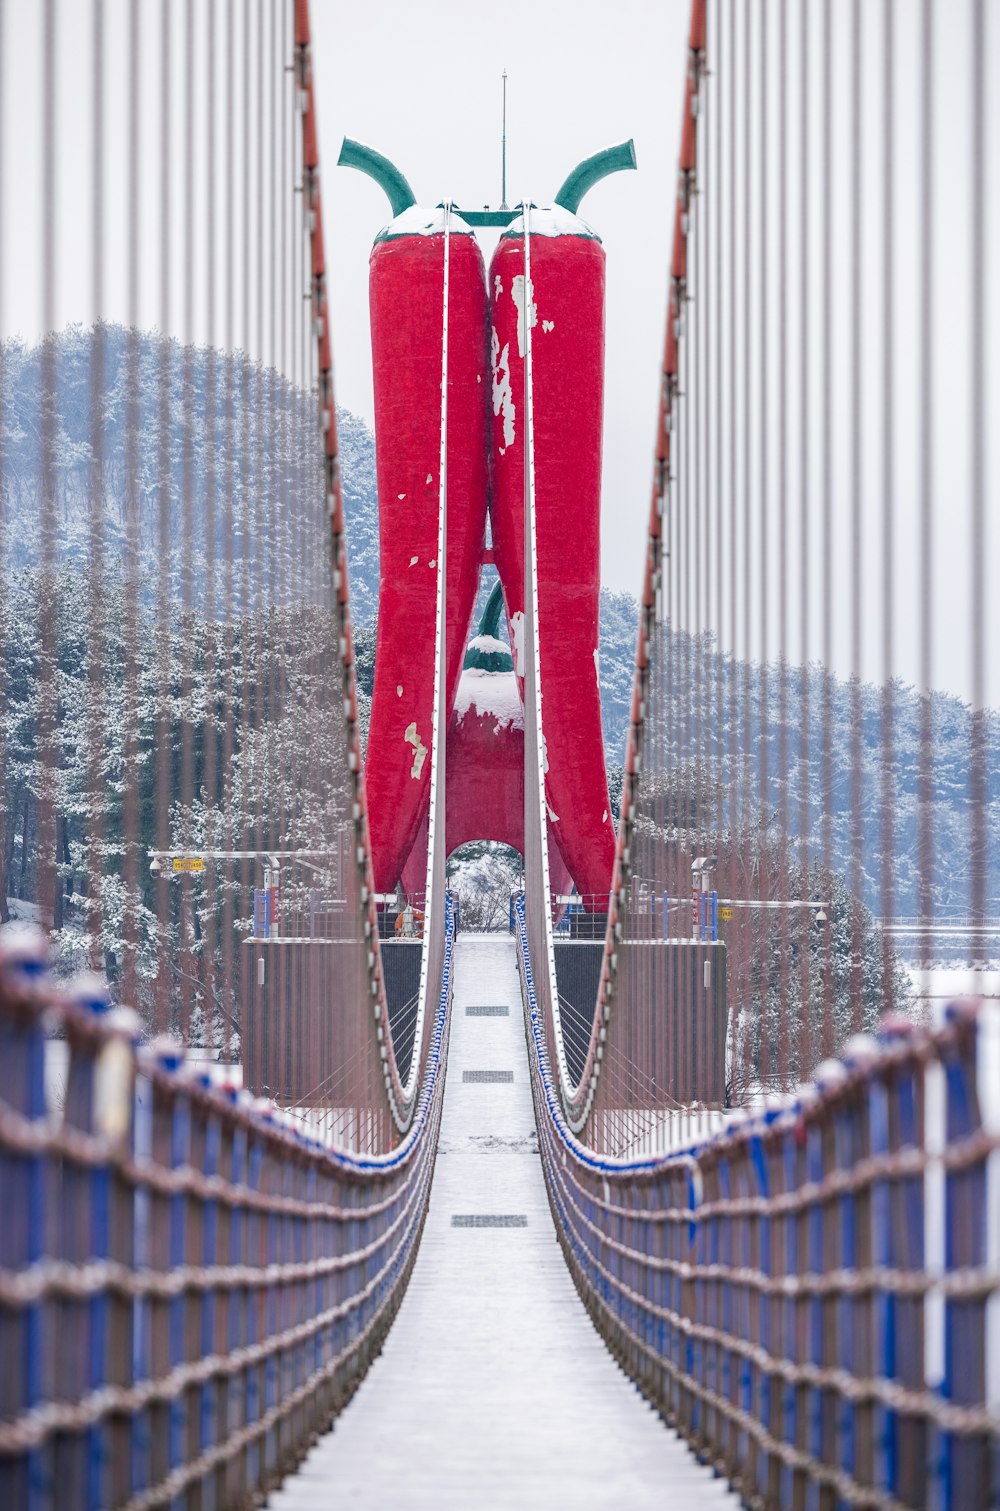 a very tall red object on a bridge